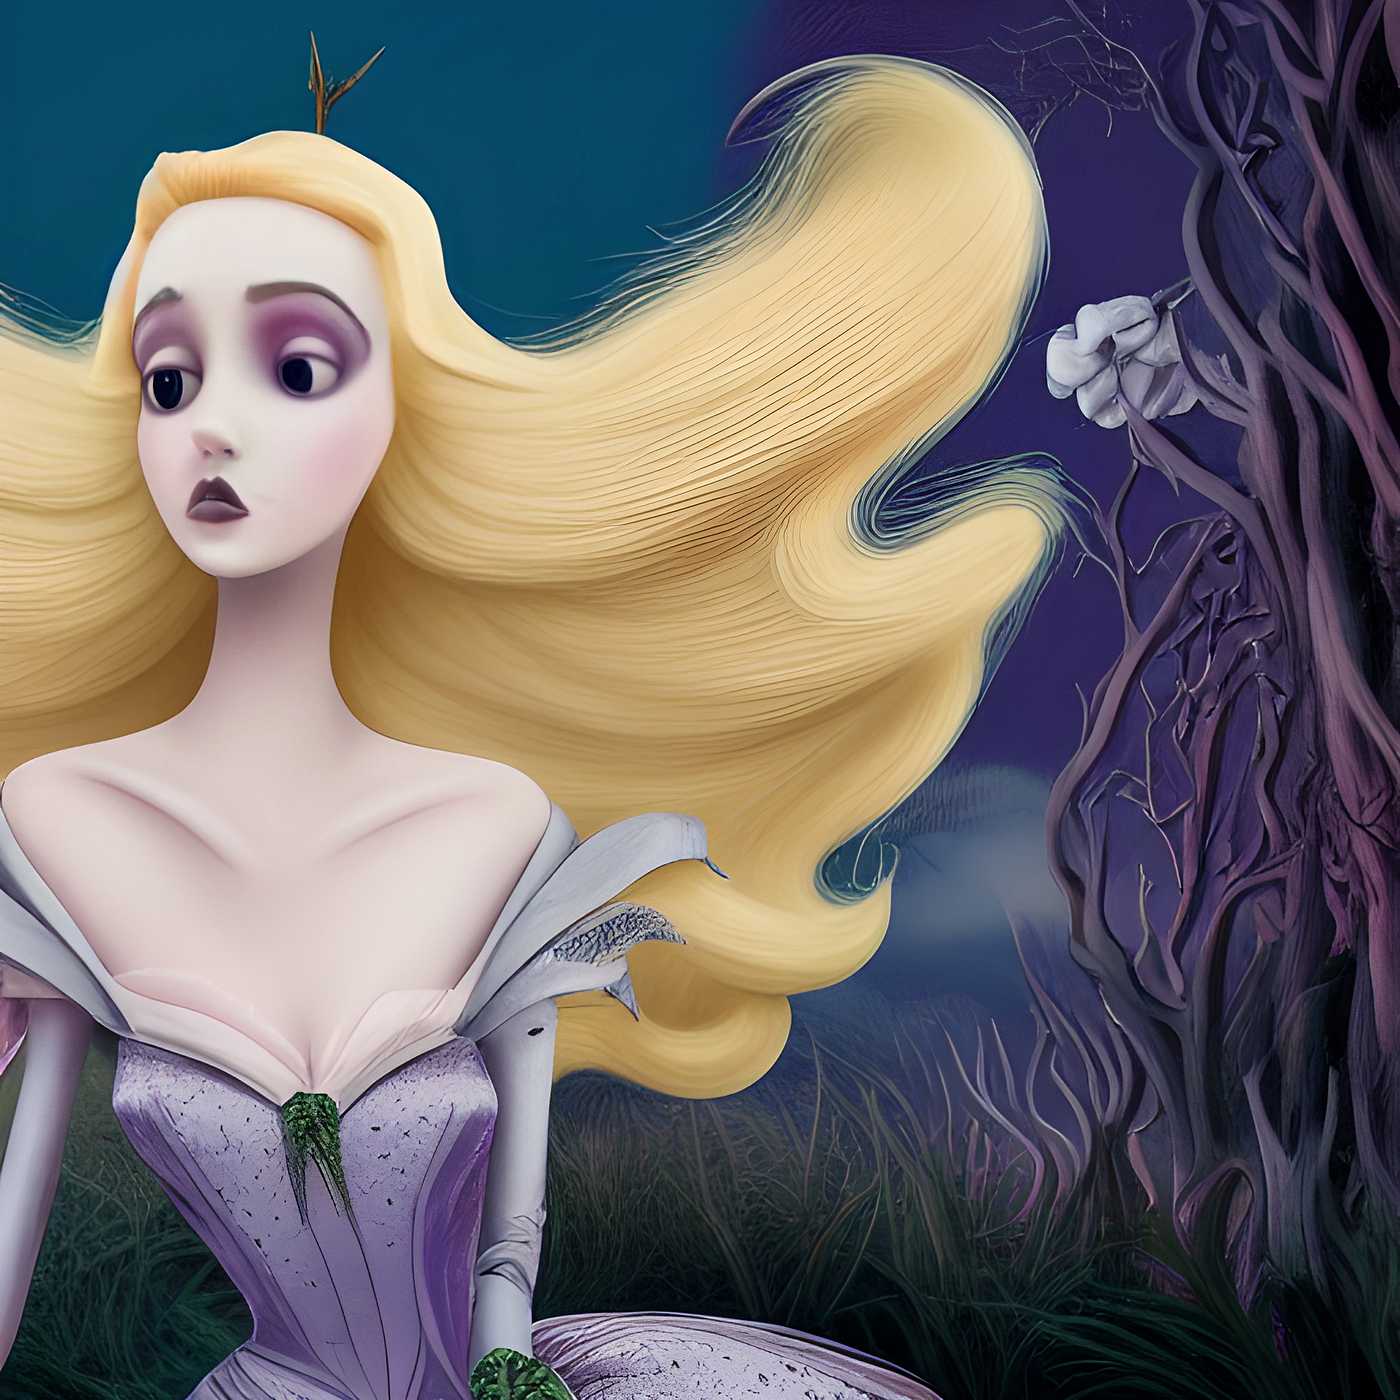 The Innovations and Artistry of Sleeping Beauty — The Disney Classics